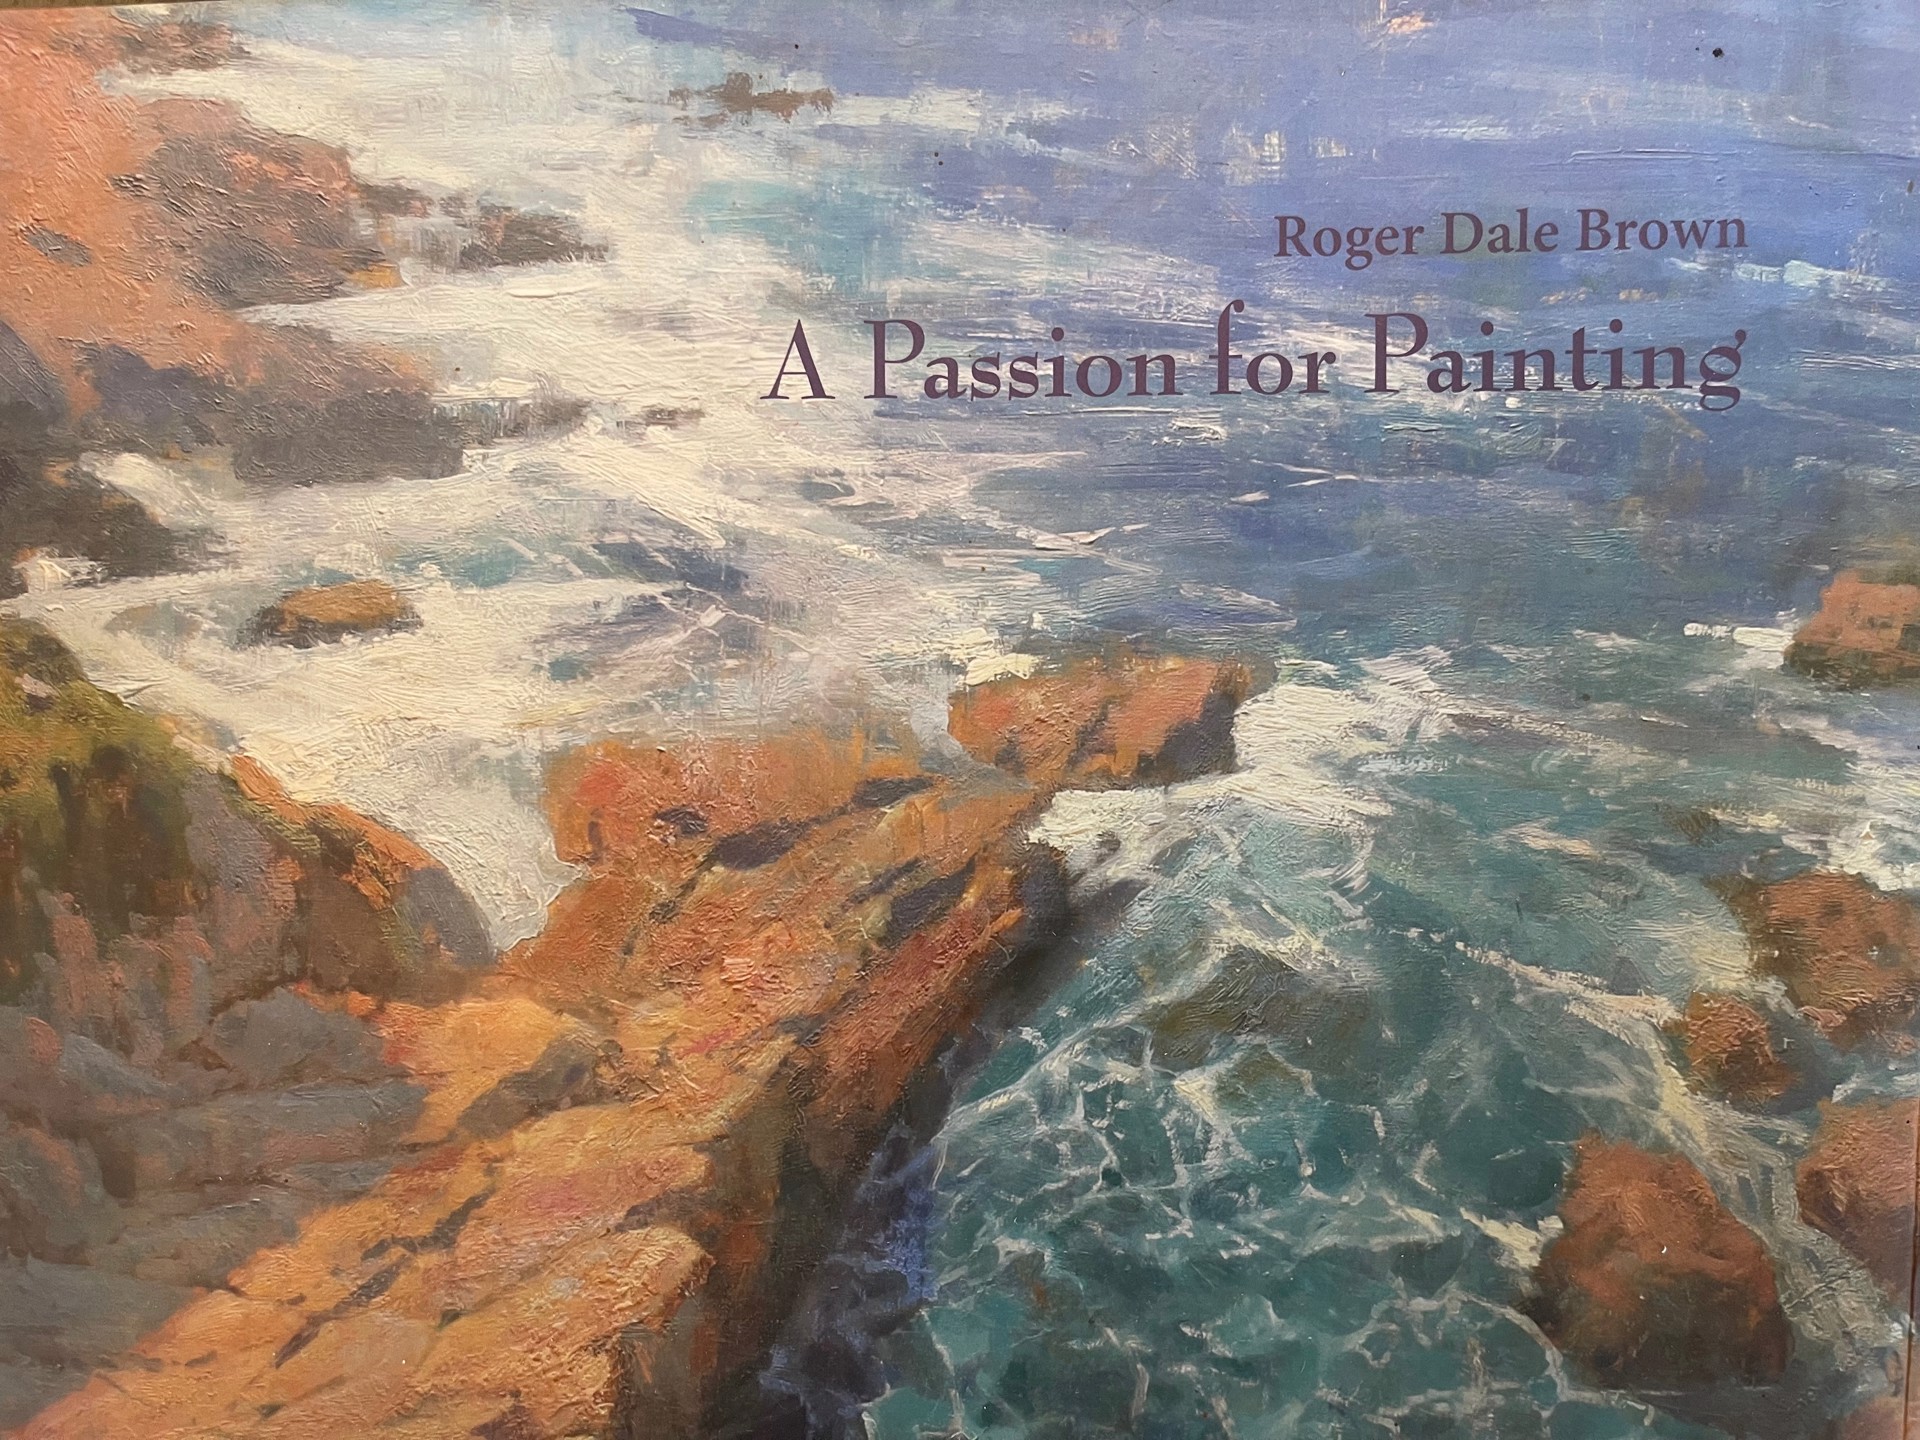 A Passion for Painting: Roger Dale Brown by Roger Dale Brown, OPAM, AISM, ASMA, ARCLM